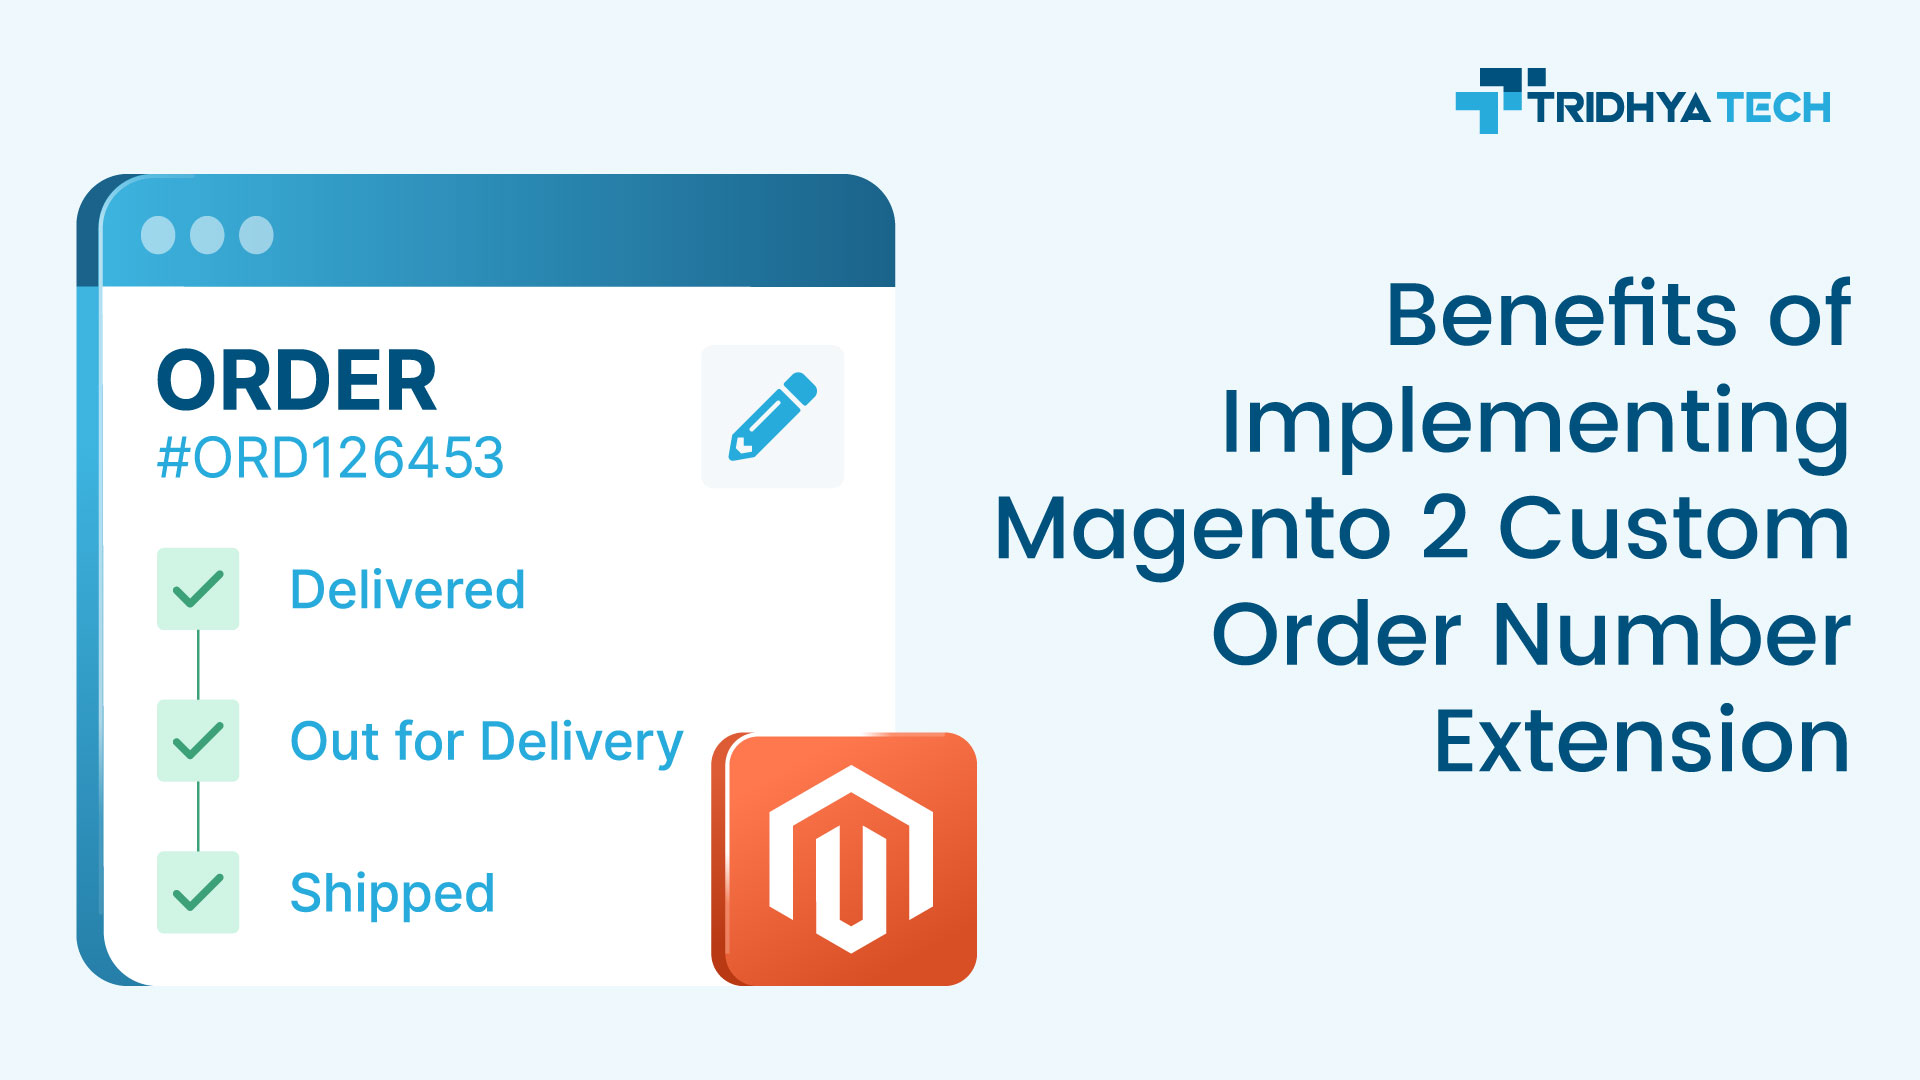 Benefits of Implementing Magento 2 Custom Order Number Extension